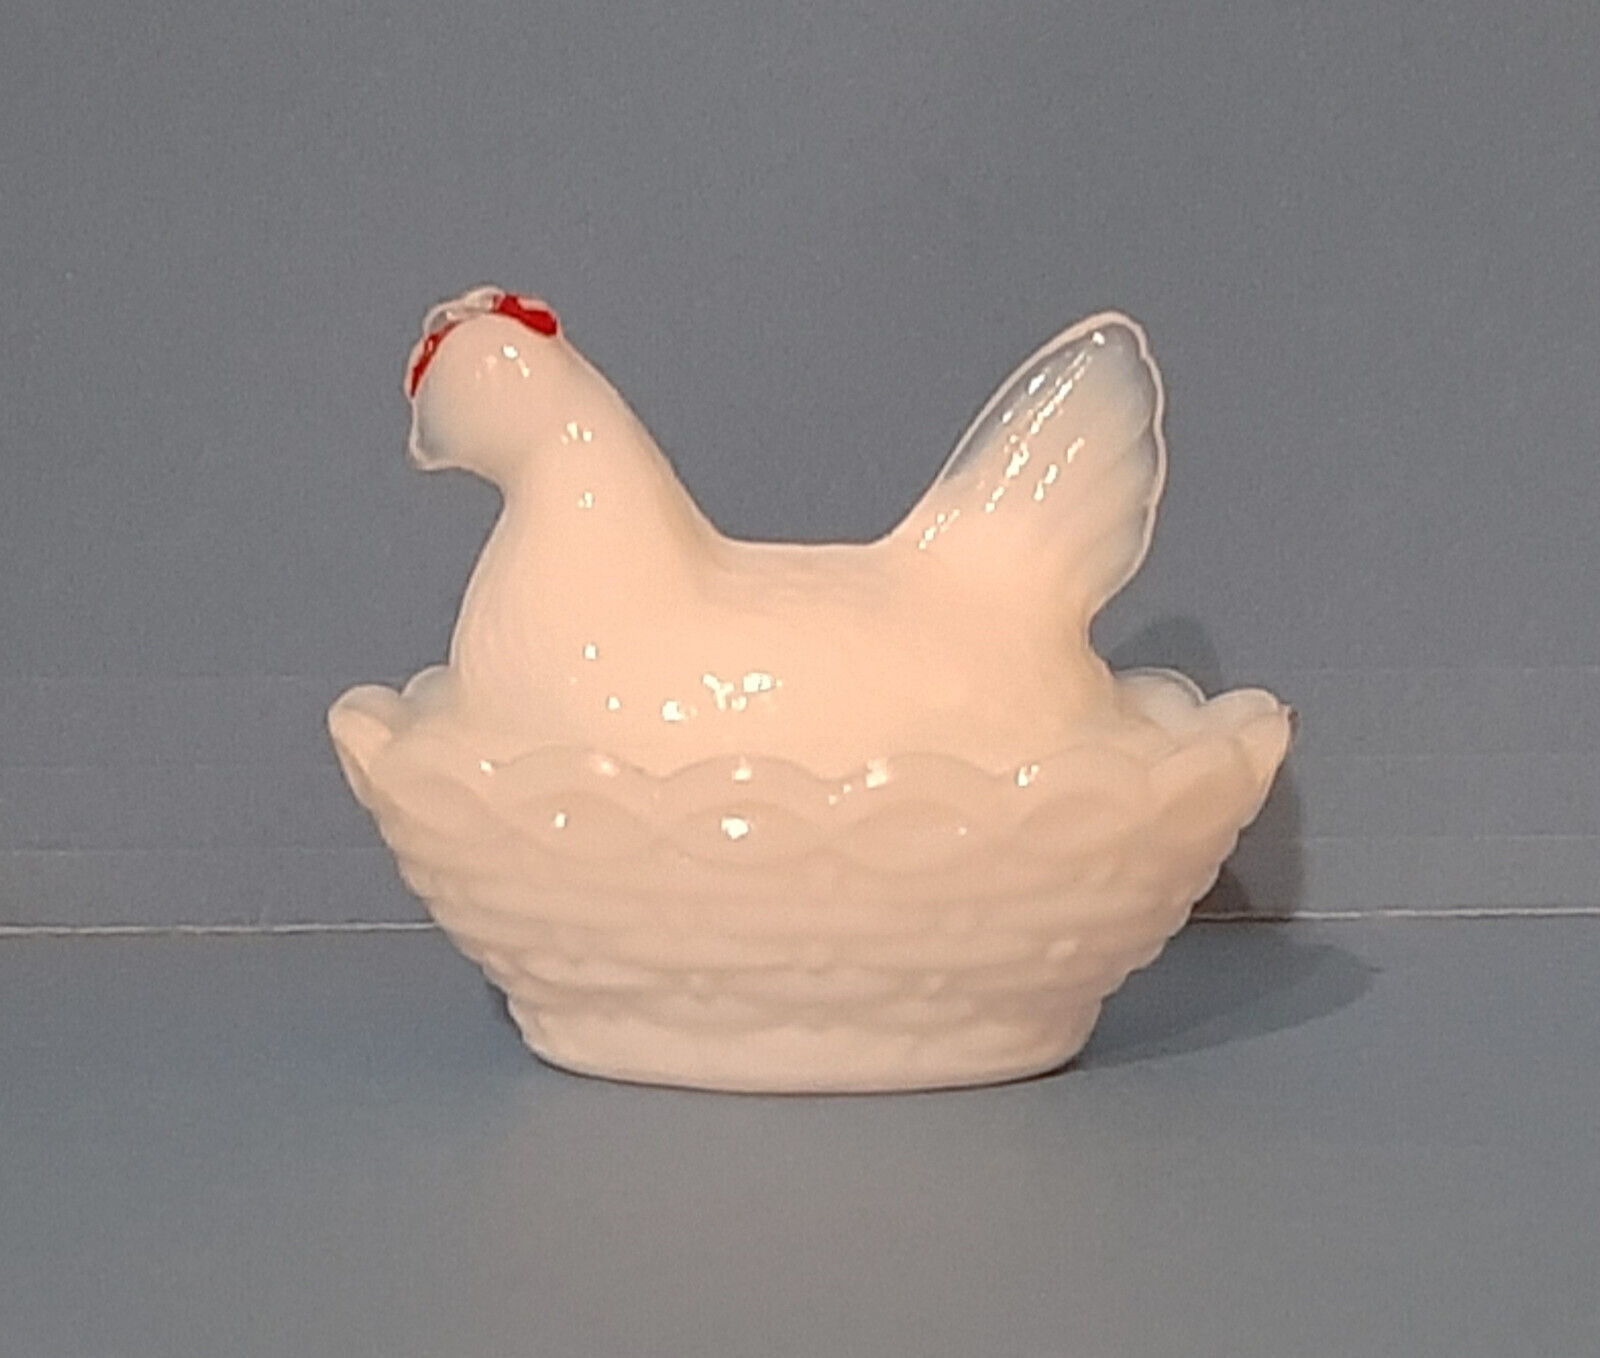 2 pc. Milk Glass Hen on basket nest - with red paint accent. Vintage 1940s.